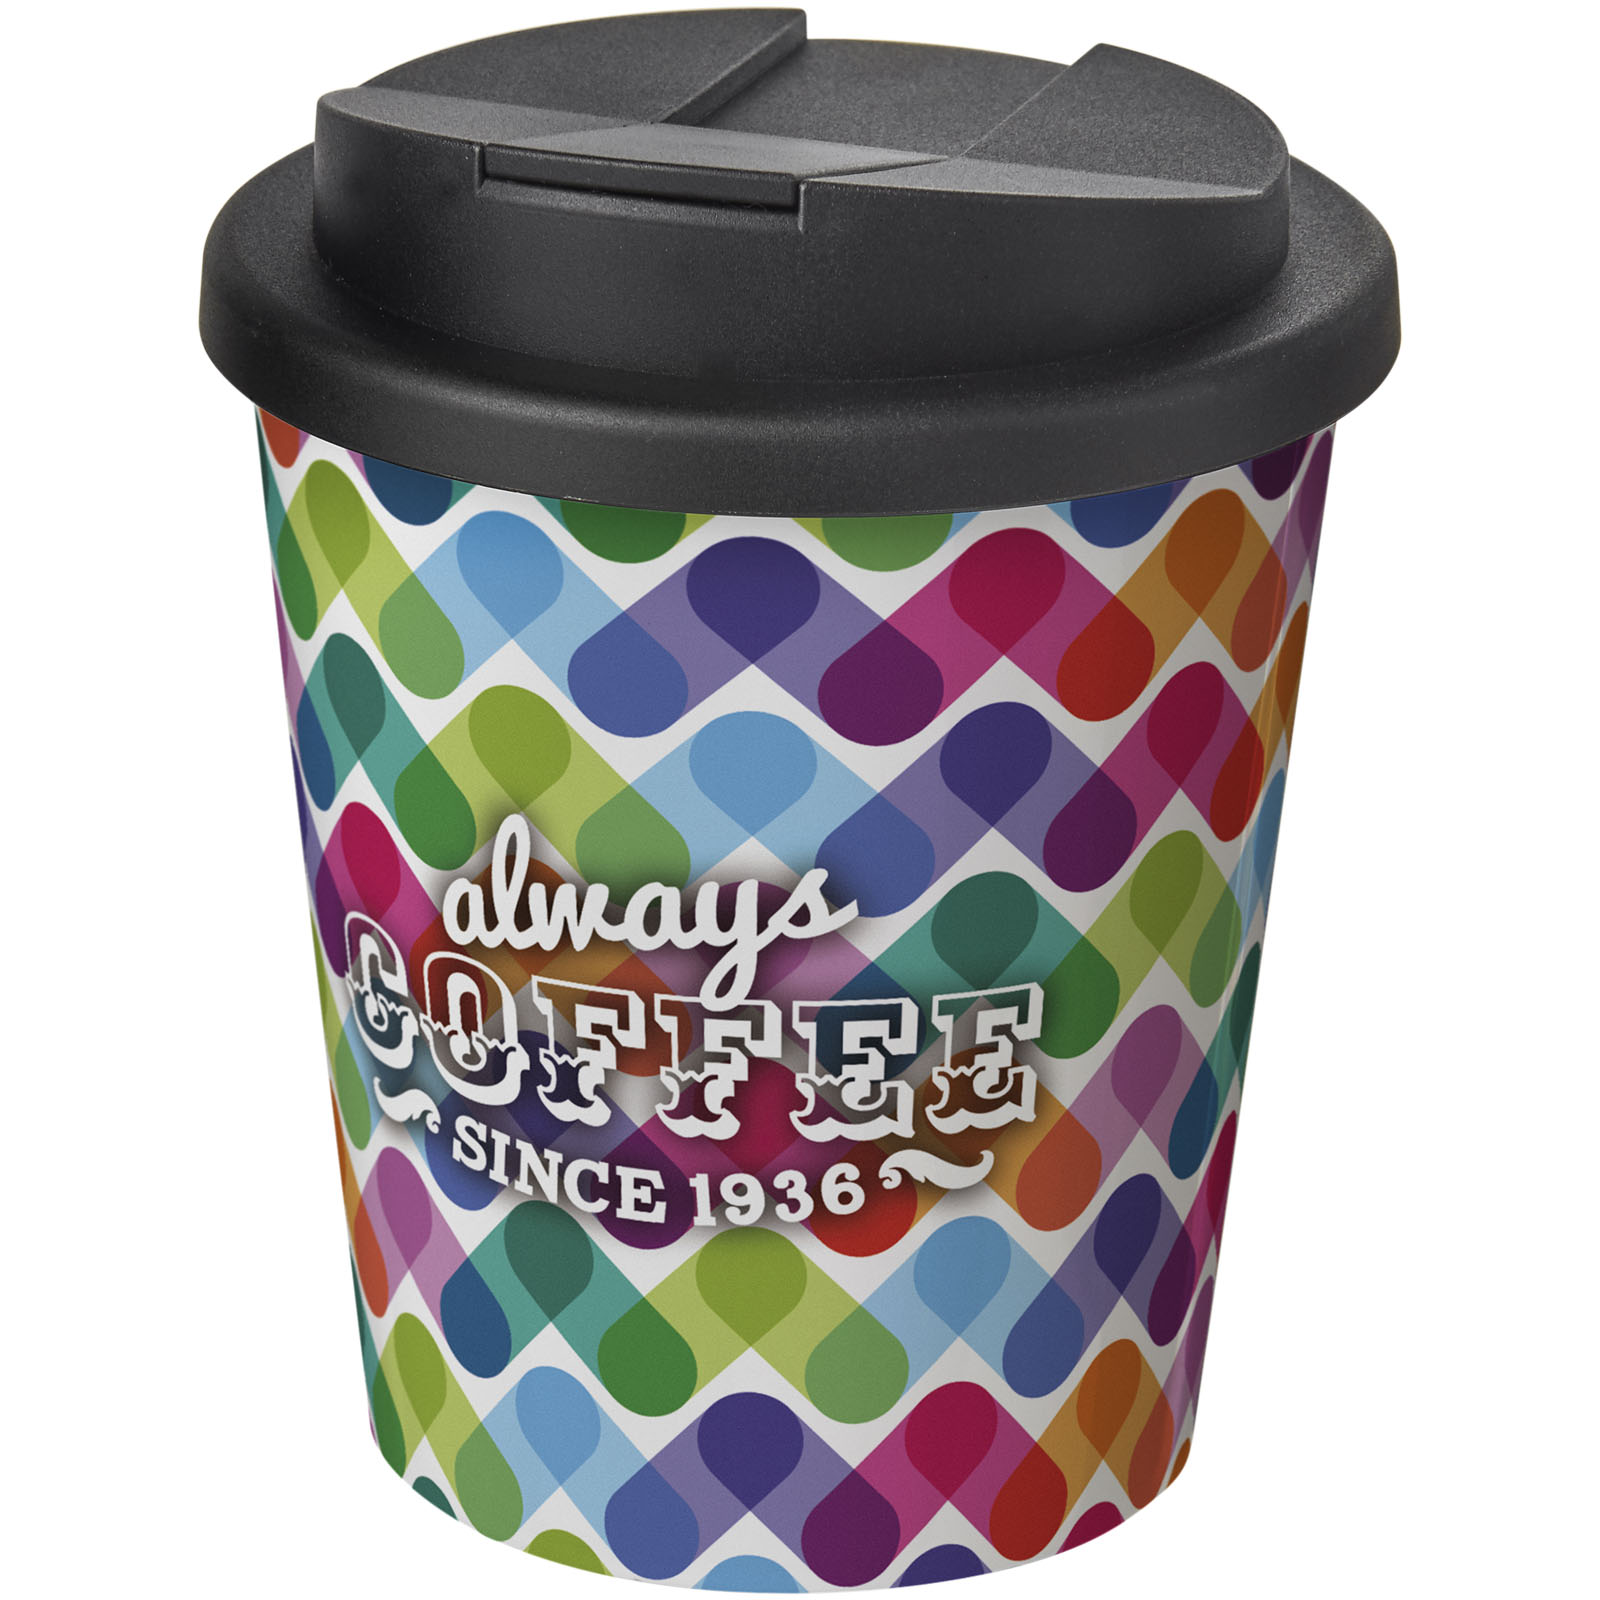 SecureSpill-Proof Insulated Tumbler - East Keswick - Bewdley